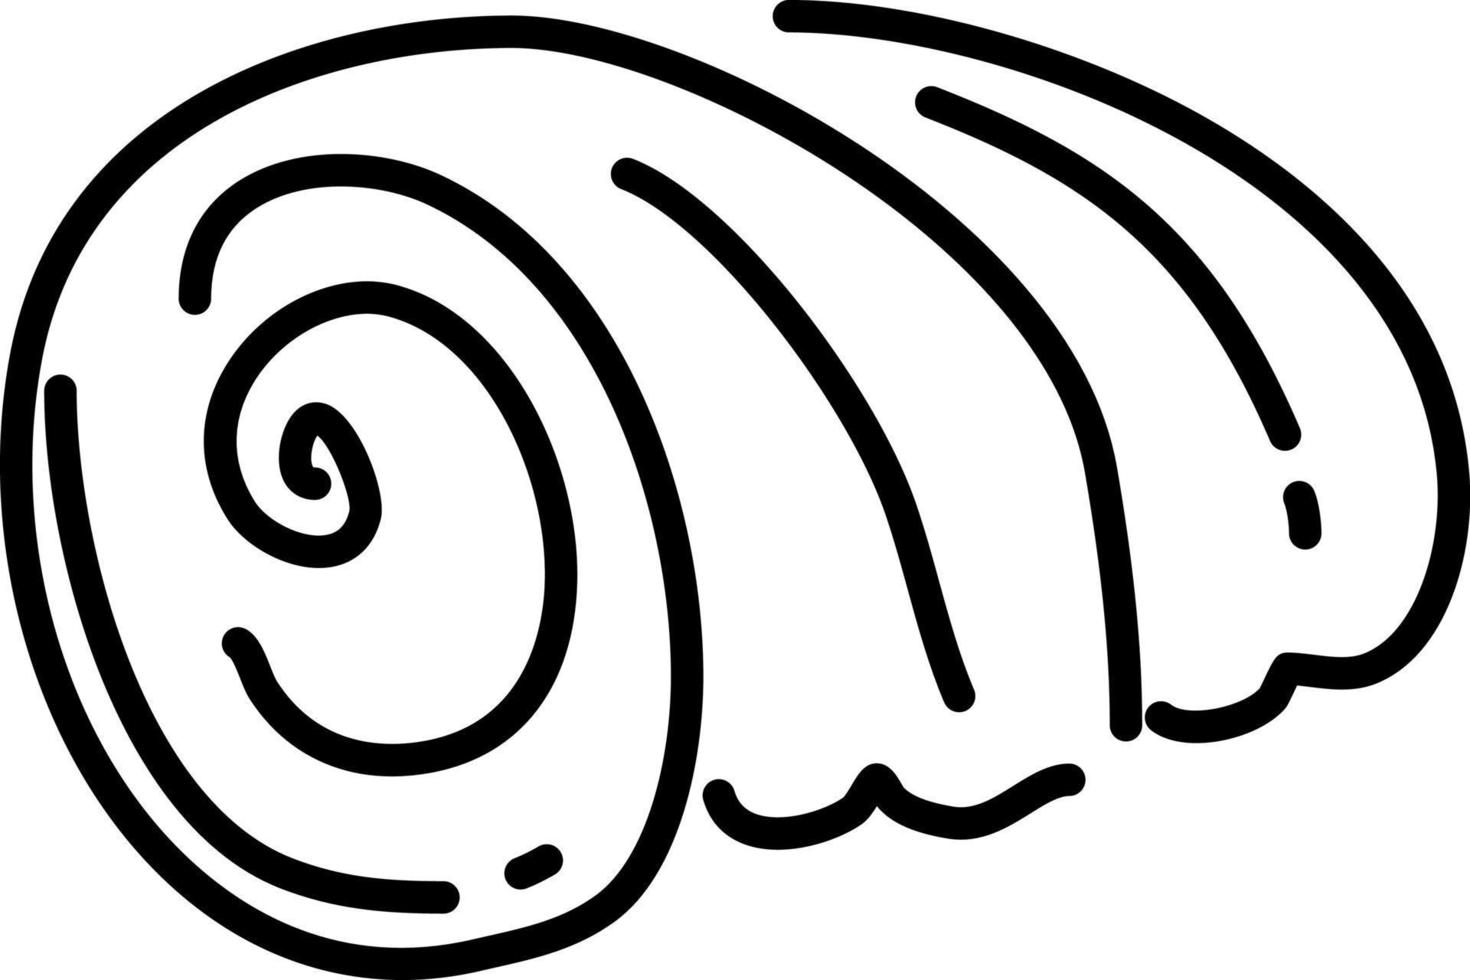 Animal sea shell, illustration, vector on a white background